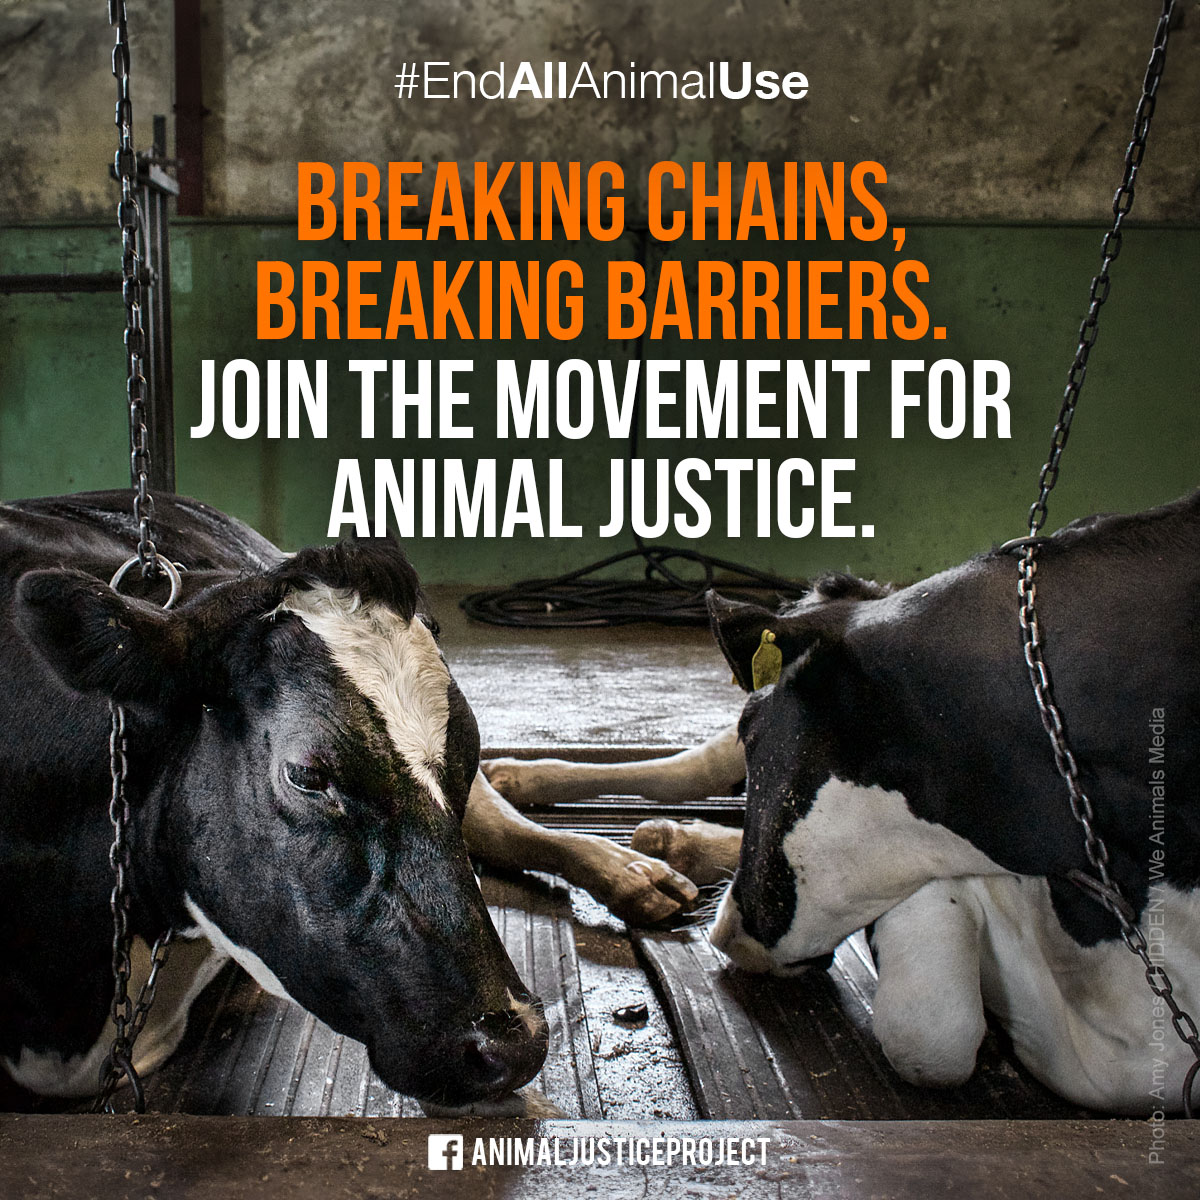 ✊ The myth of dominion has fueled the oppression of animals for far too long. These cows, and all other animals, deserve freedom and their rights to be recognised. Join us in building a future of respect for all. donate.animaljusticeproject.com/main #EndAllAnimalUse